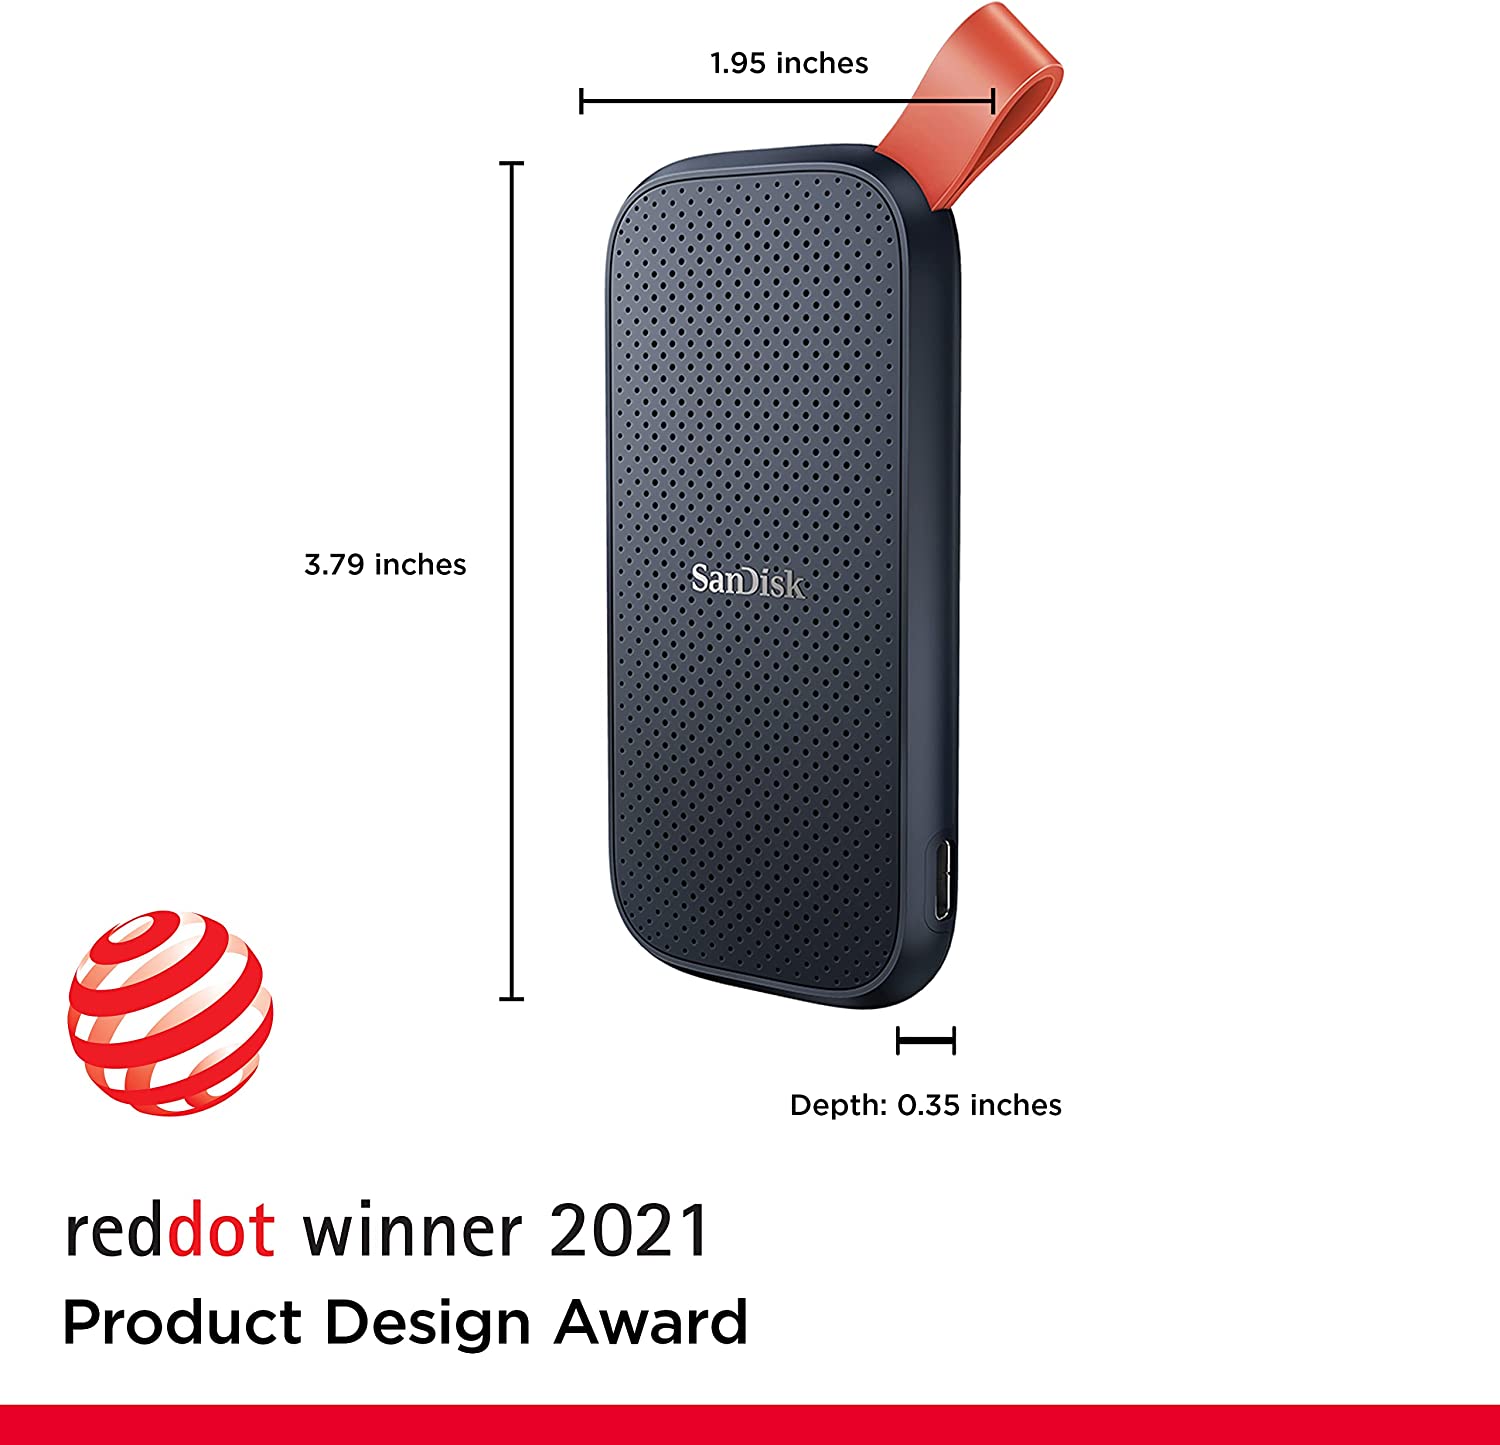 Backup Your Genealogy Research and Save 26% on SanDisk 2TB Portable SSD!